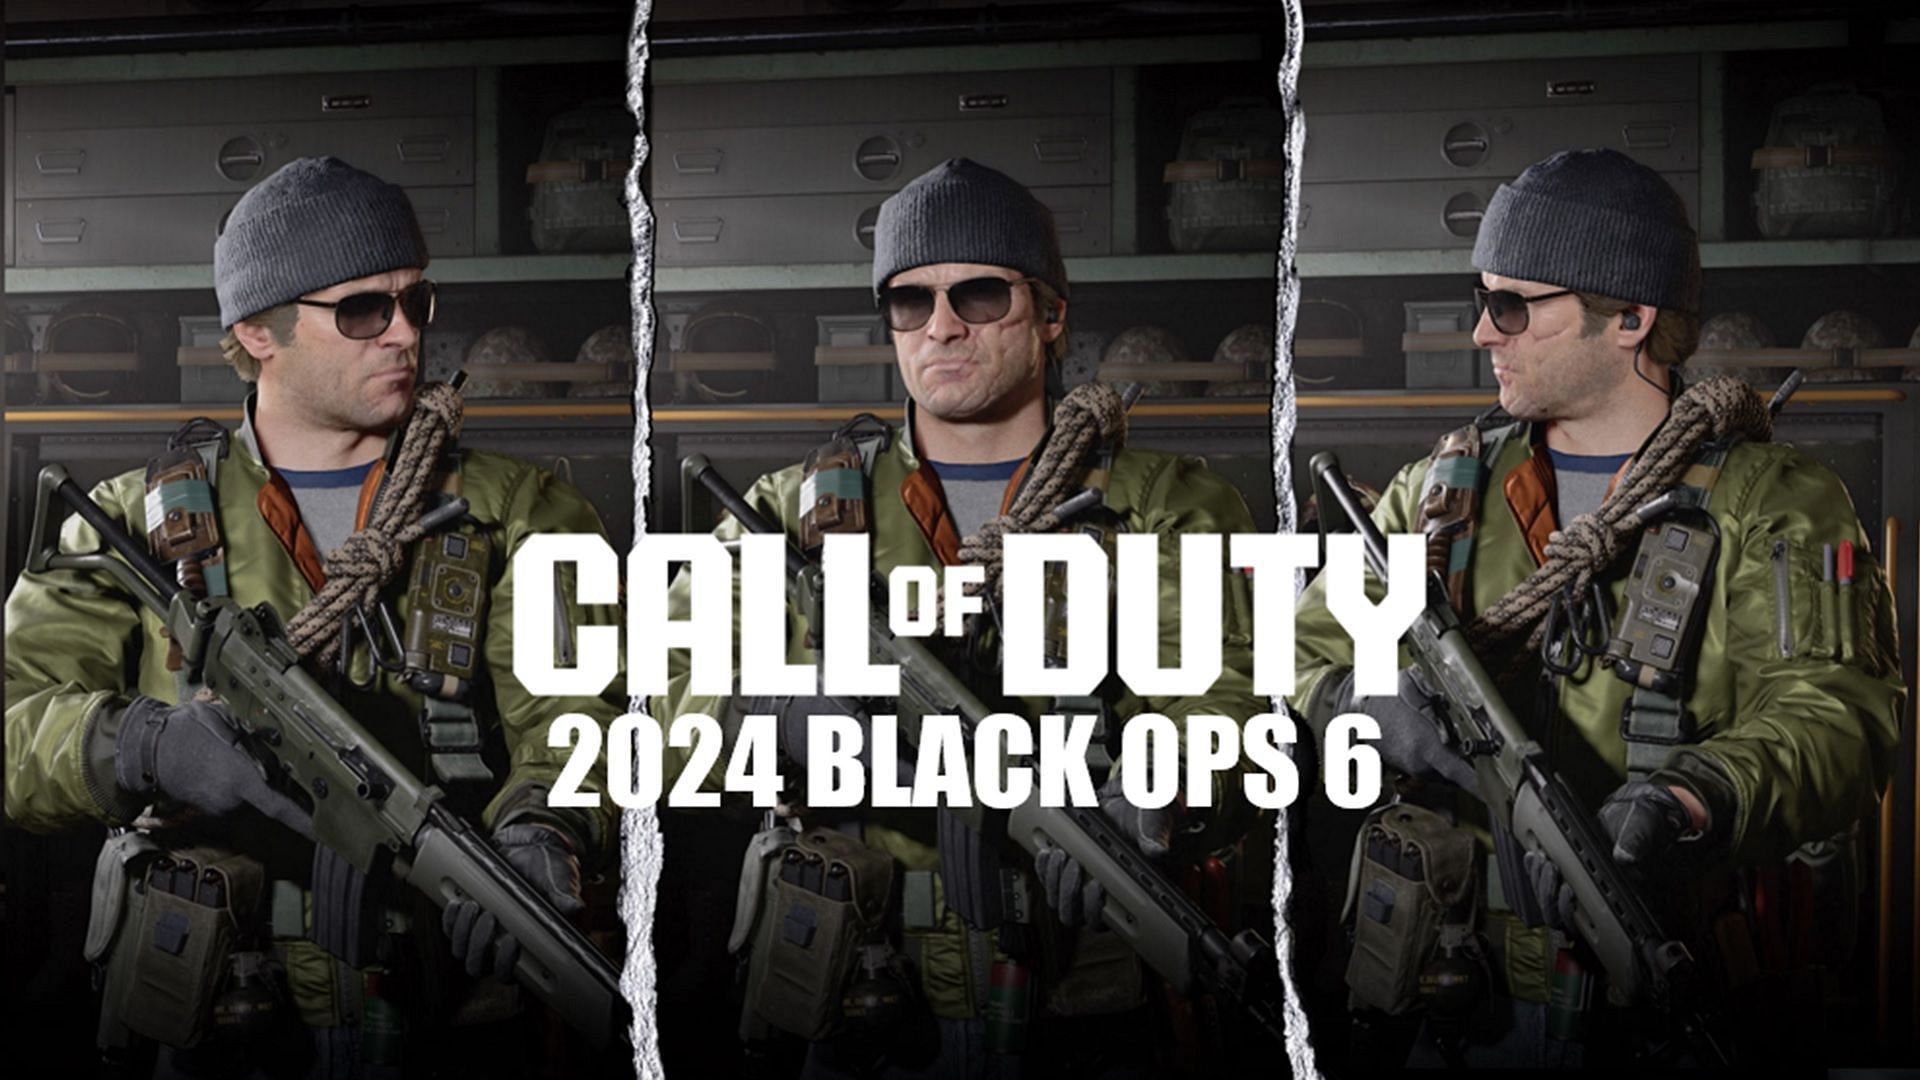 A reliable insider has reportedly leaked the first poster from CoD 2024 Black Ops 6 by Treyarch